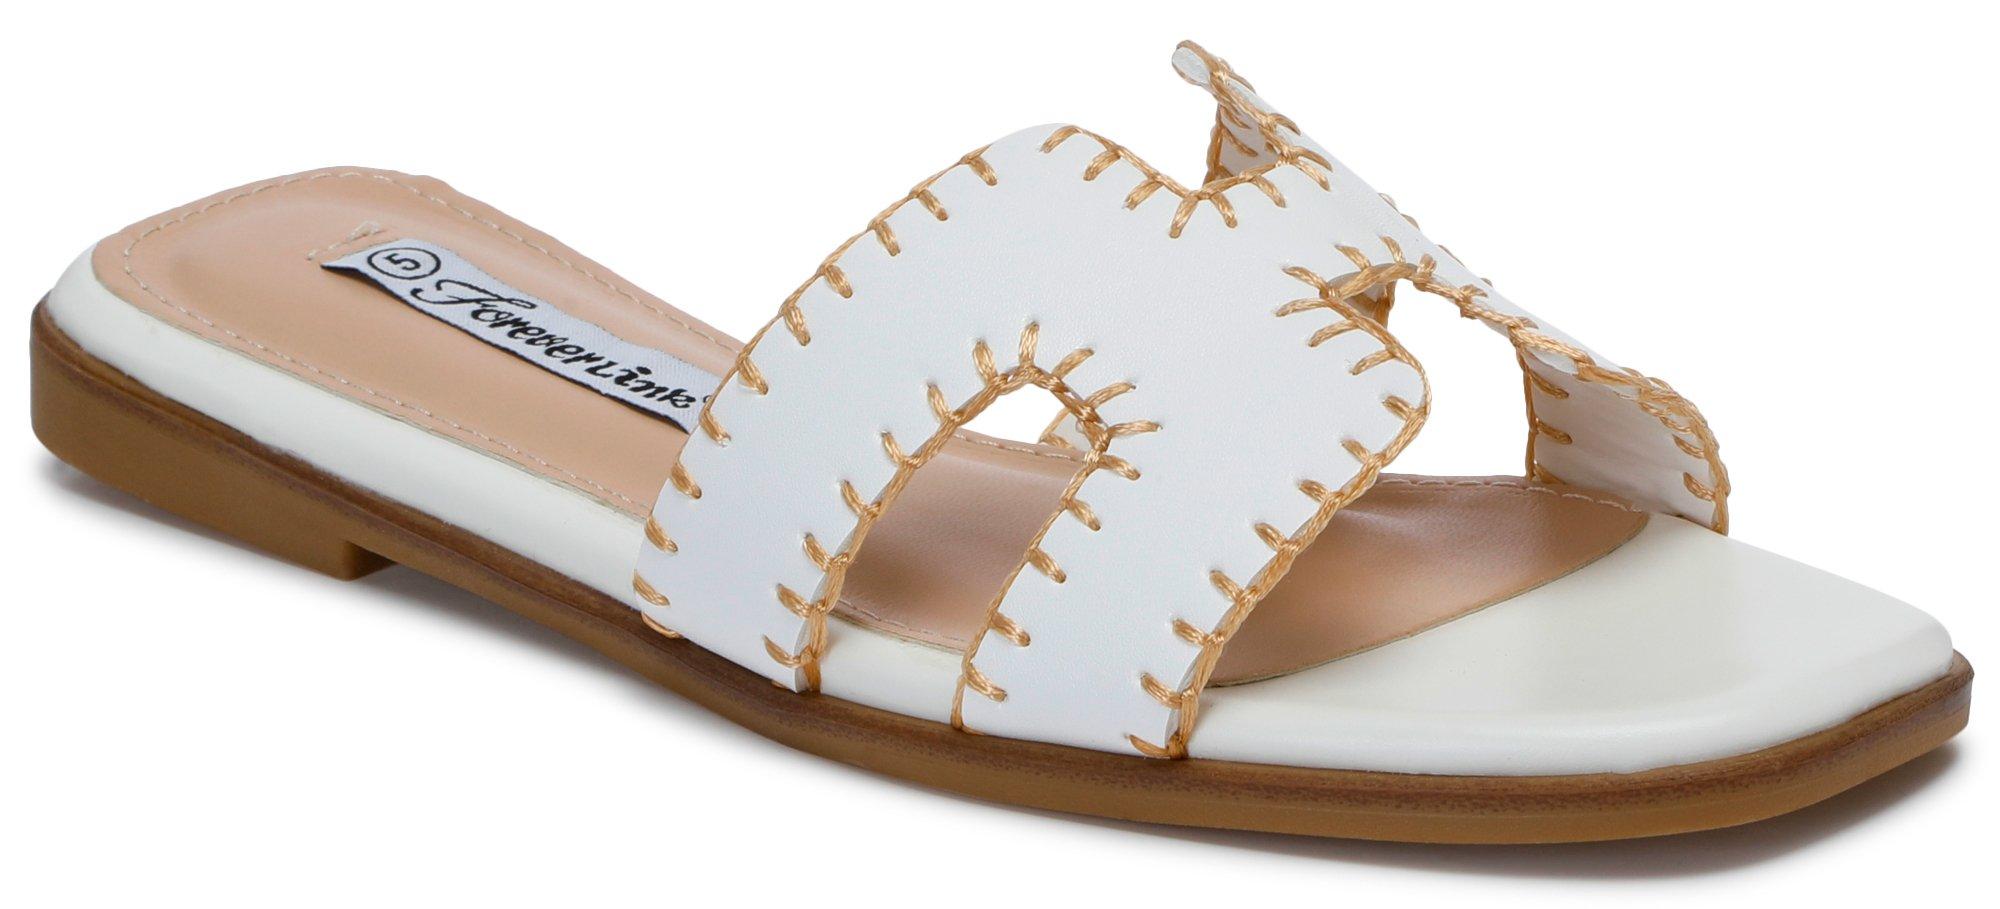 Women's Embroidered Single Band Slides